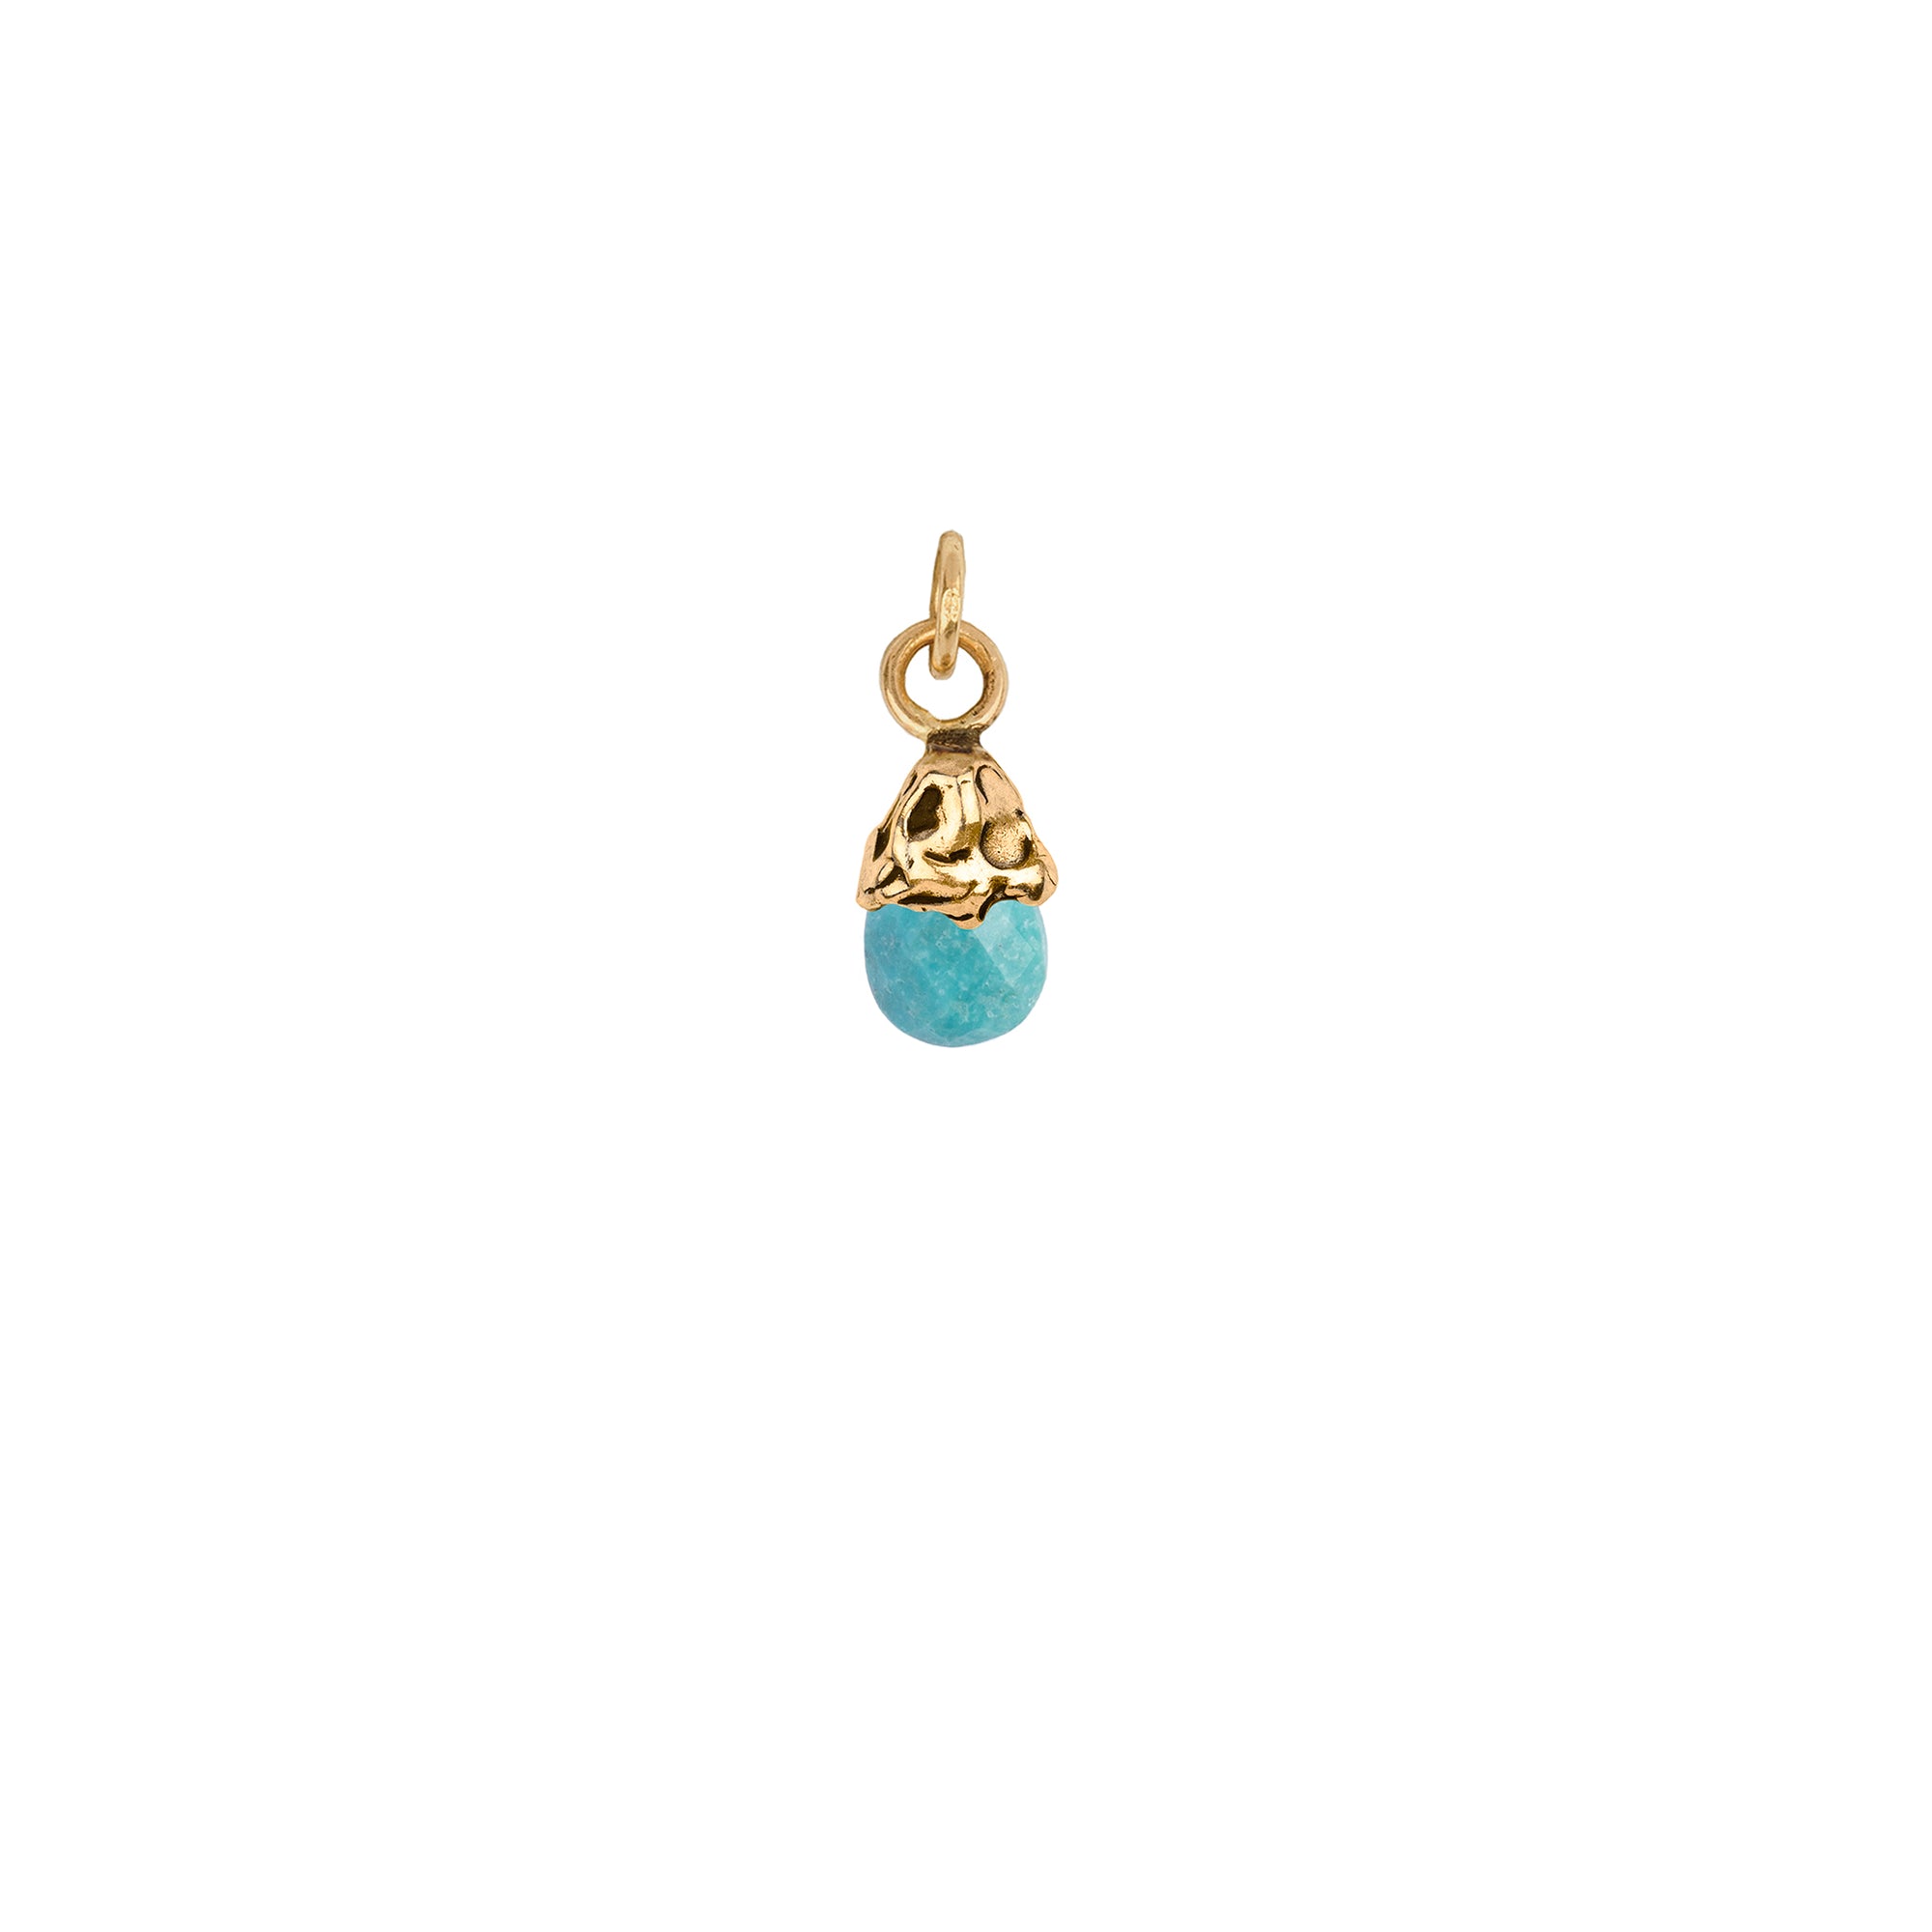 Friendship 14K Gold Capped Attraction Charm